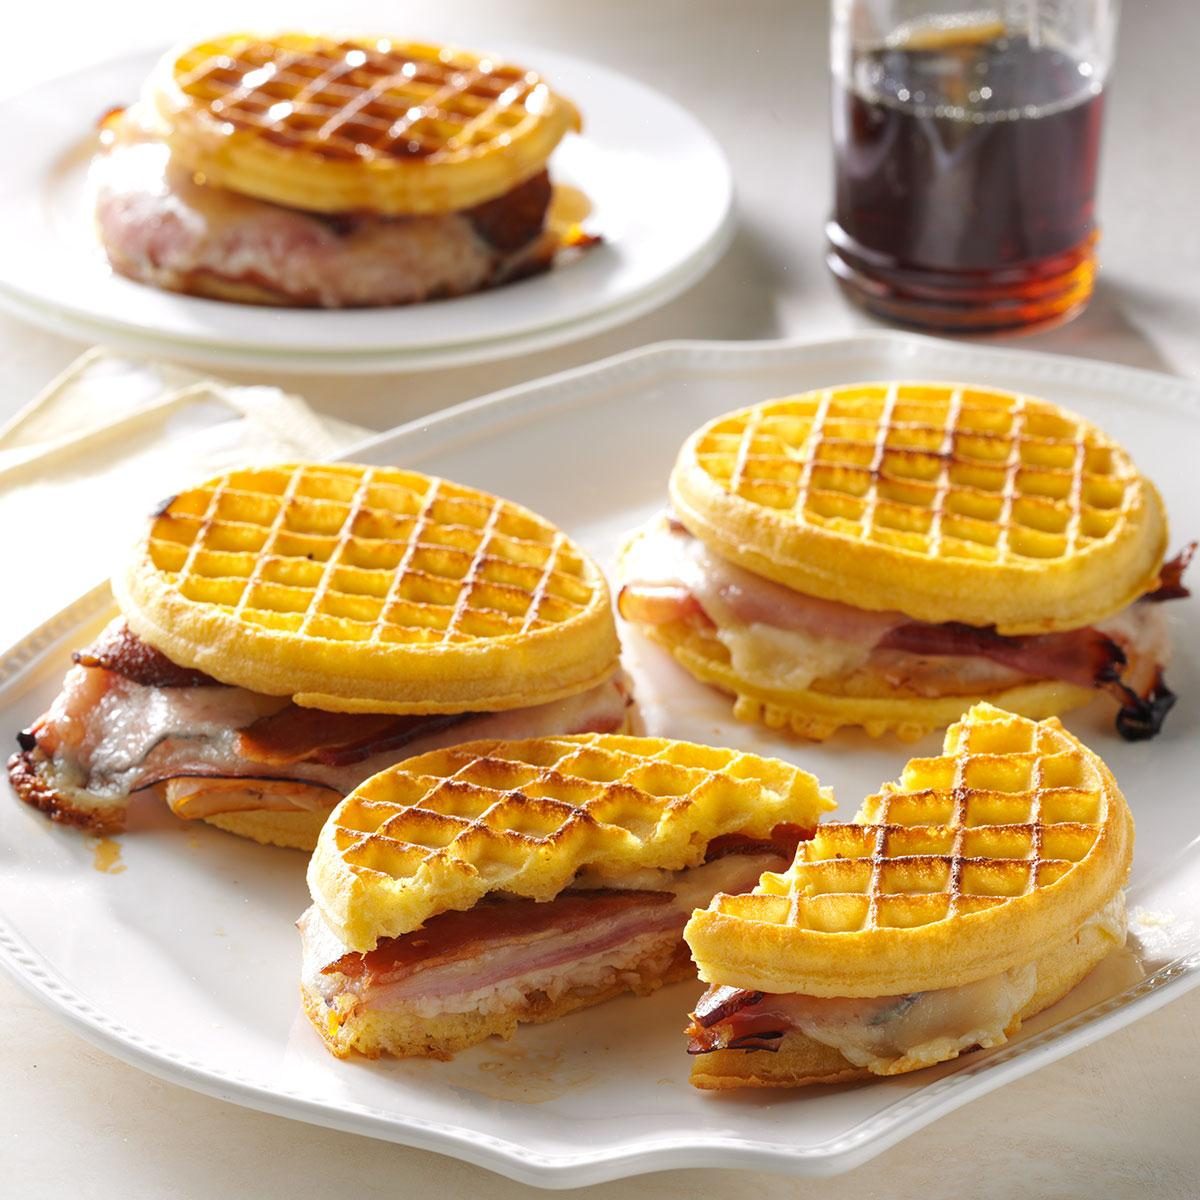 Mini Waffle Maker, Electric Sandwich Maker, And Egg Cooker Are Essential  Appliances For Breakfast And Festivals At Home.